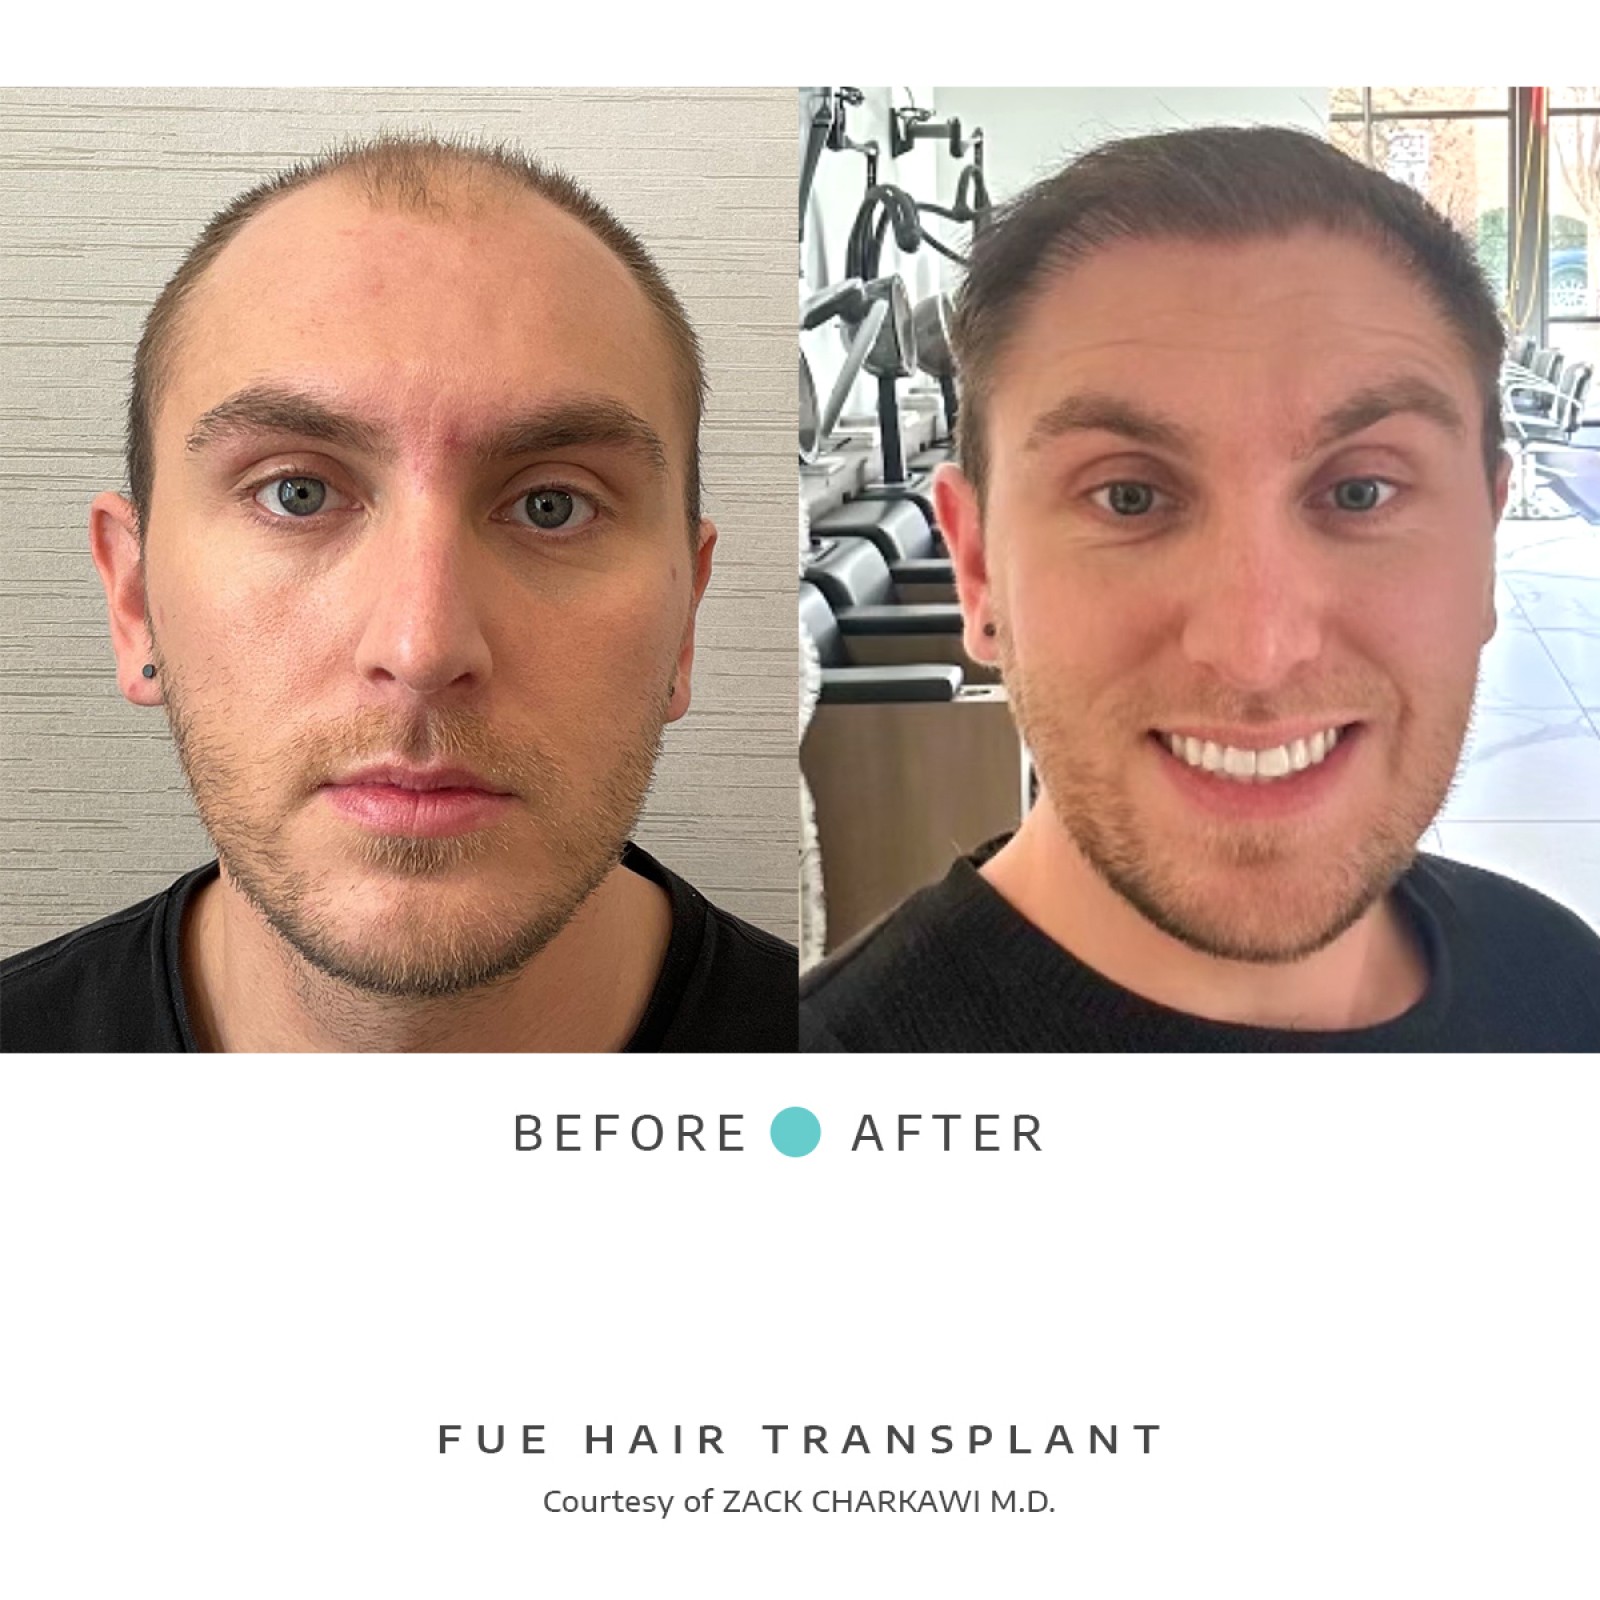 The before image depicts balding and thinning hair with visible scalp patches, while the after image illustrates a successful FUE hair transplant with the scalp now covered in dense, natural-looking hair.